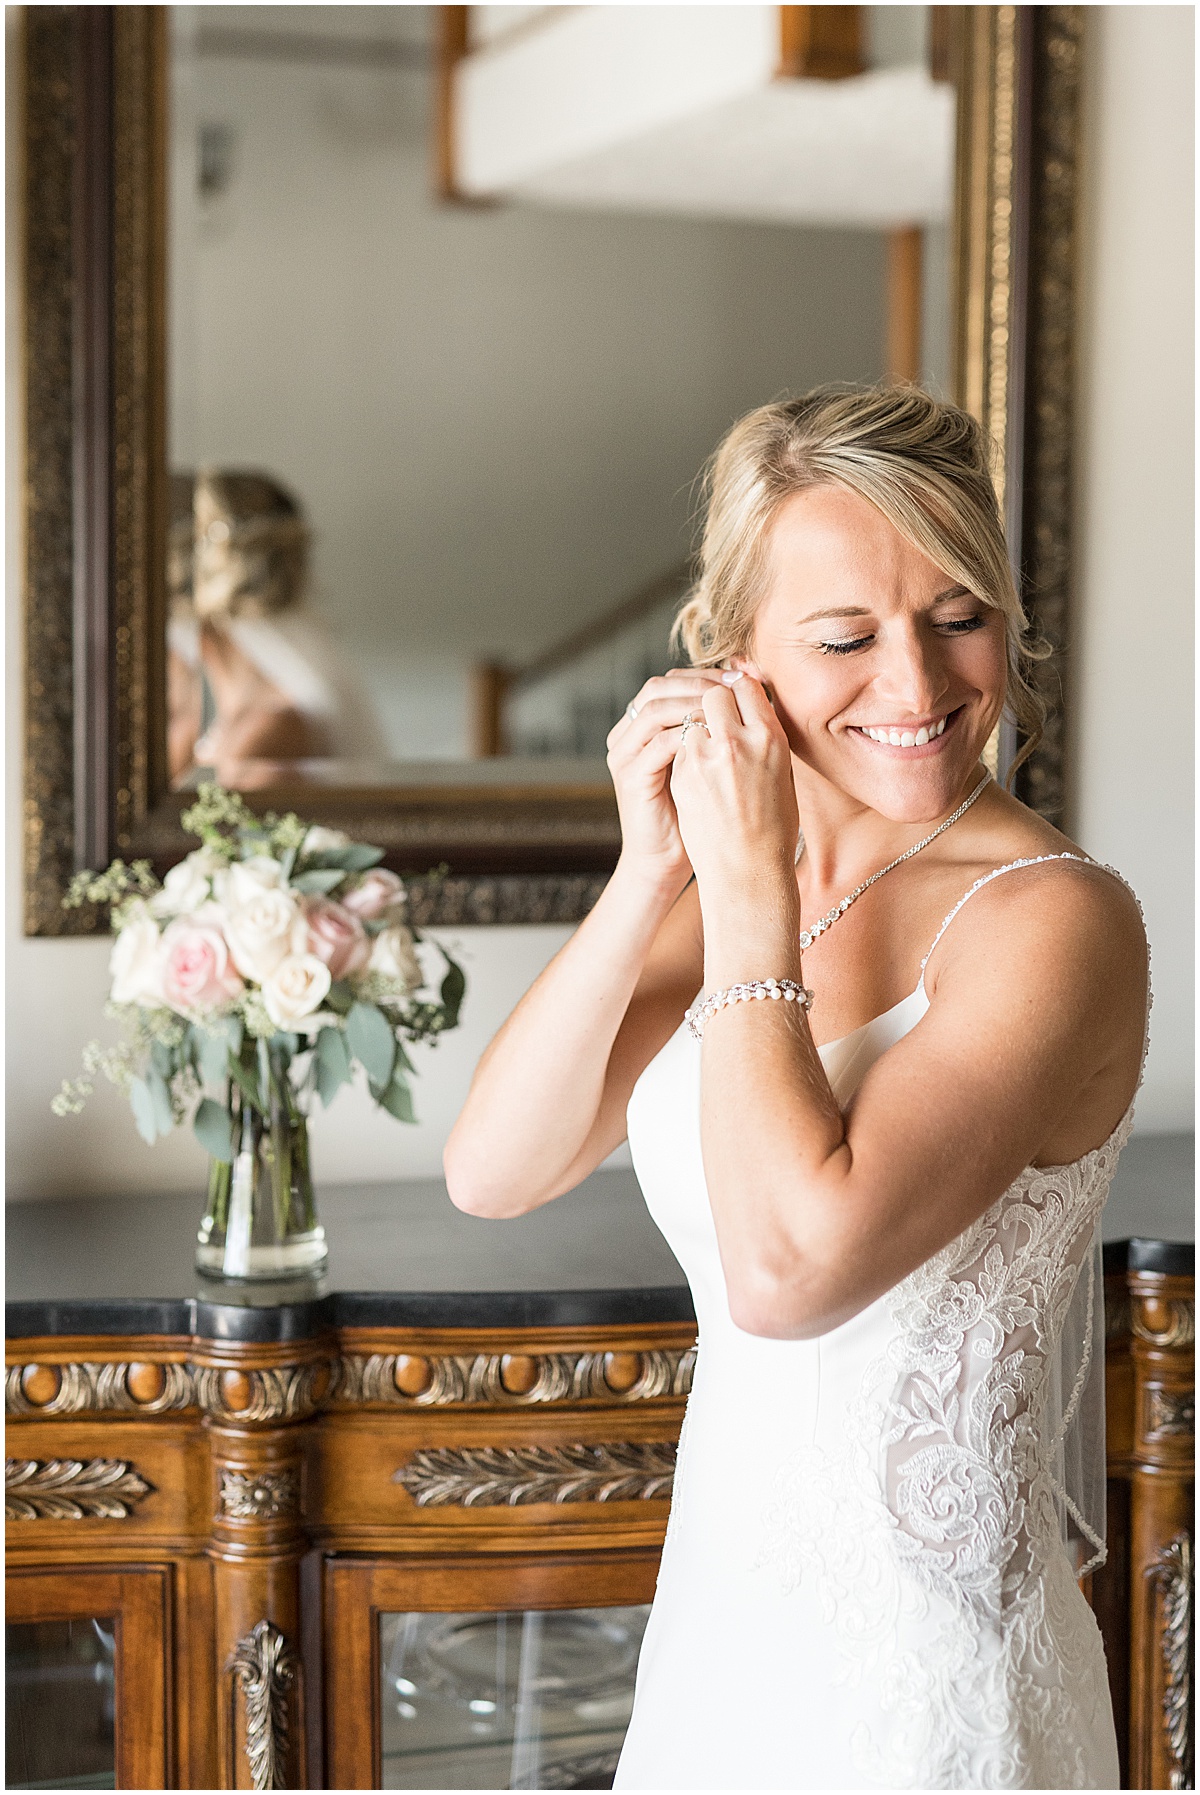 Bride getting ready for wedding at The Edge in Anderson, Indiana photographed by Indianapolis wedding photographer Victoria Rayburn